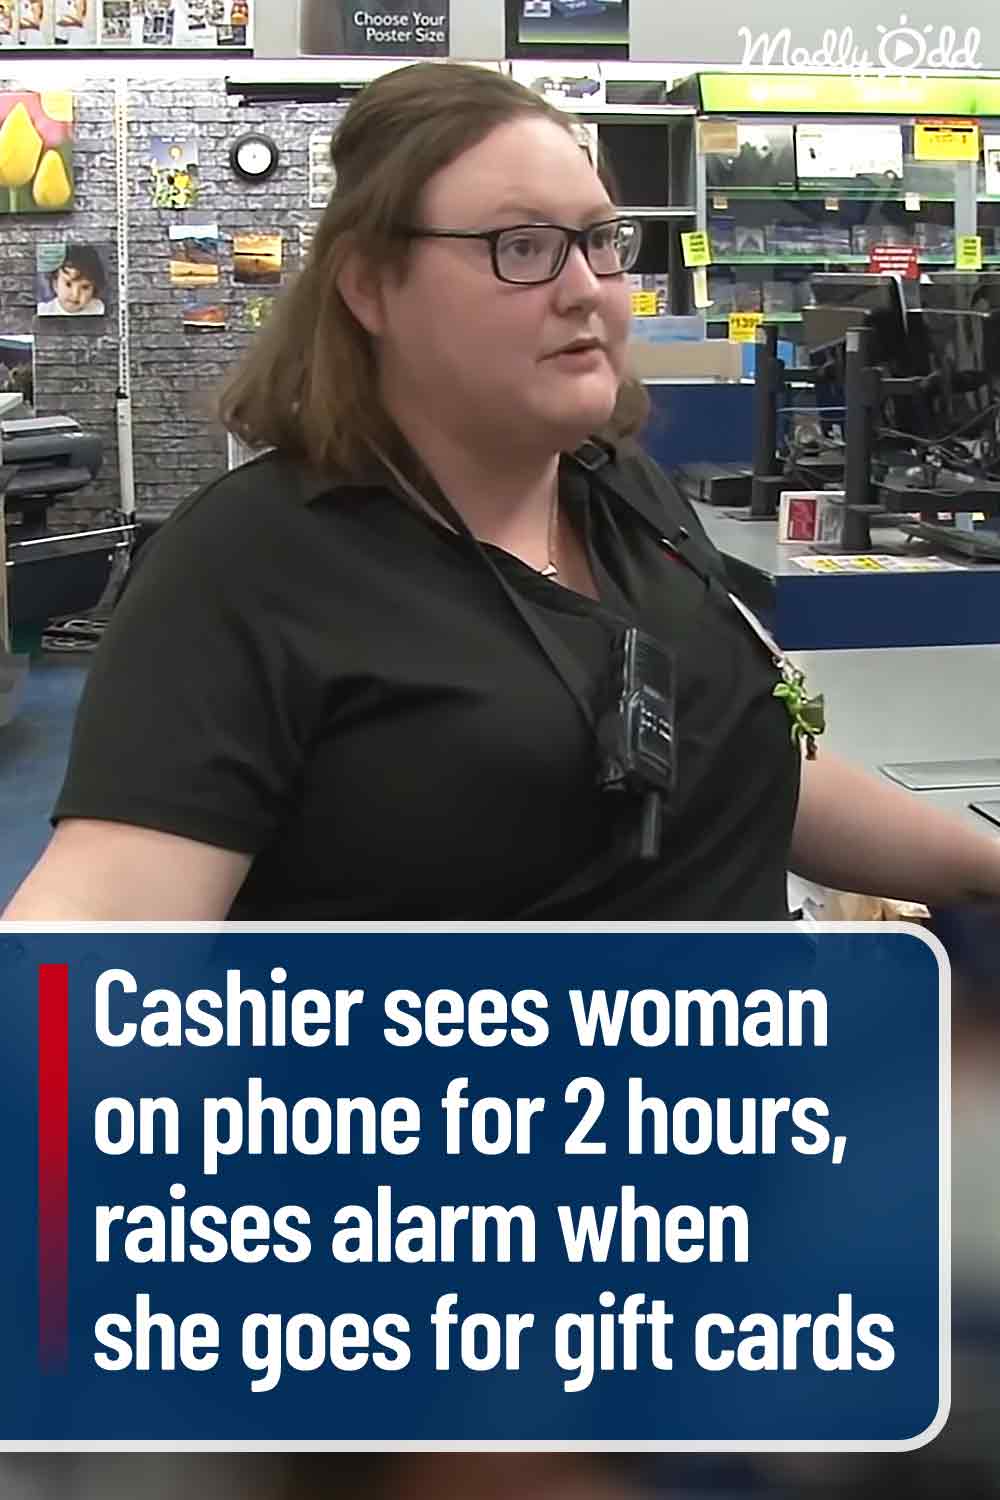 Cashier sees woman on phone for 2 hours, raises alarm when she goes for gift cards